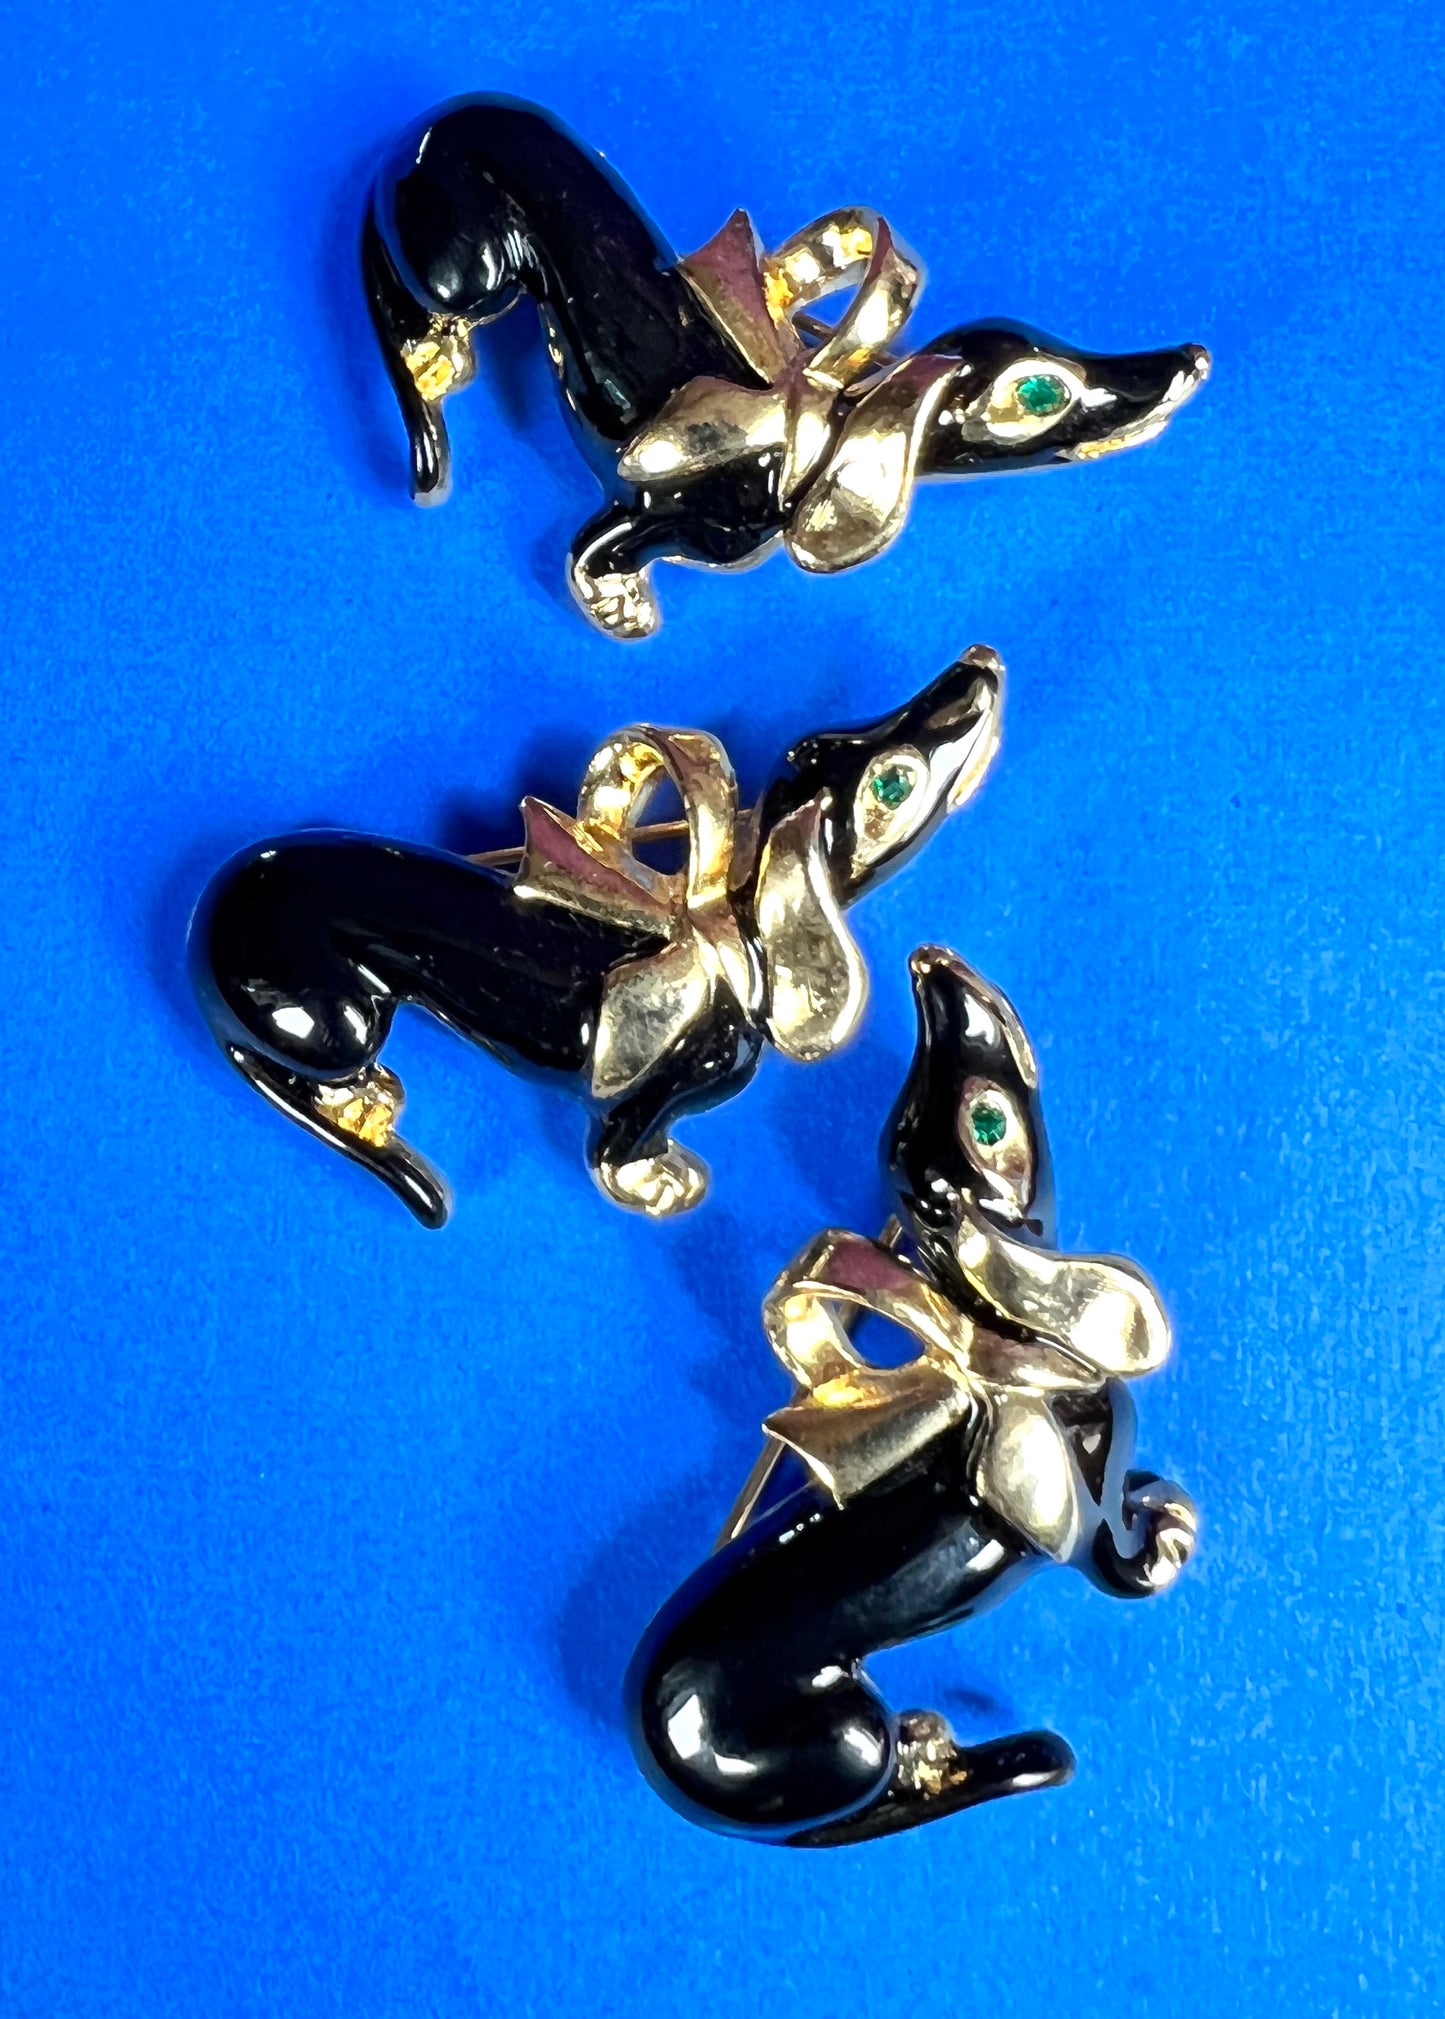 Inquisitive Gold Plated Vintage Dachshund Brooch